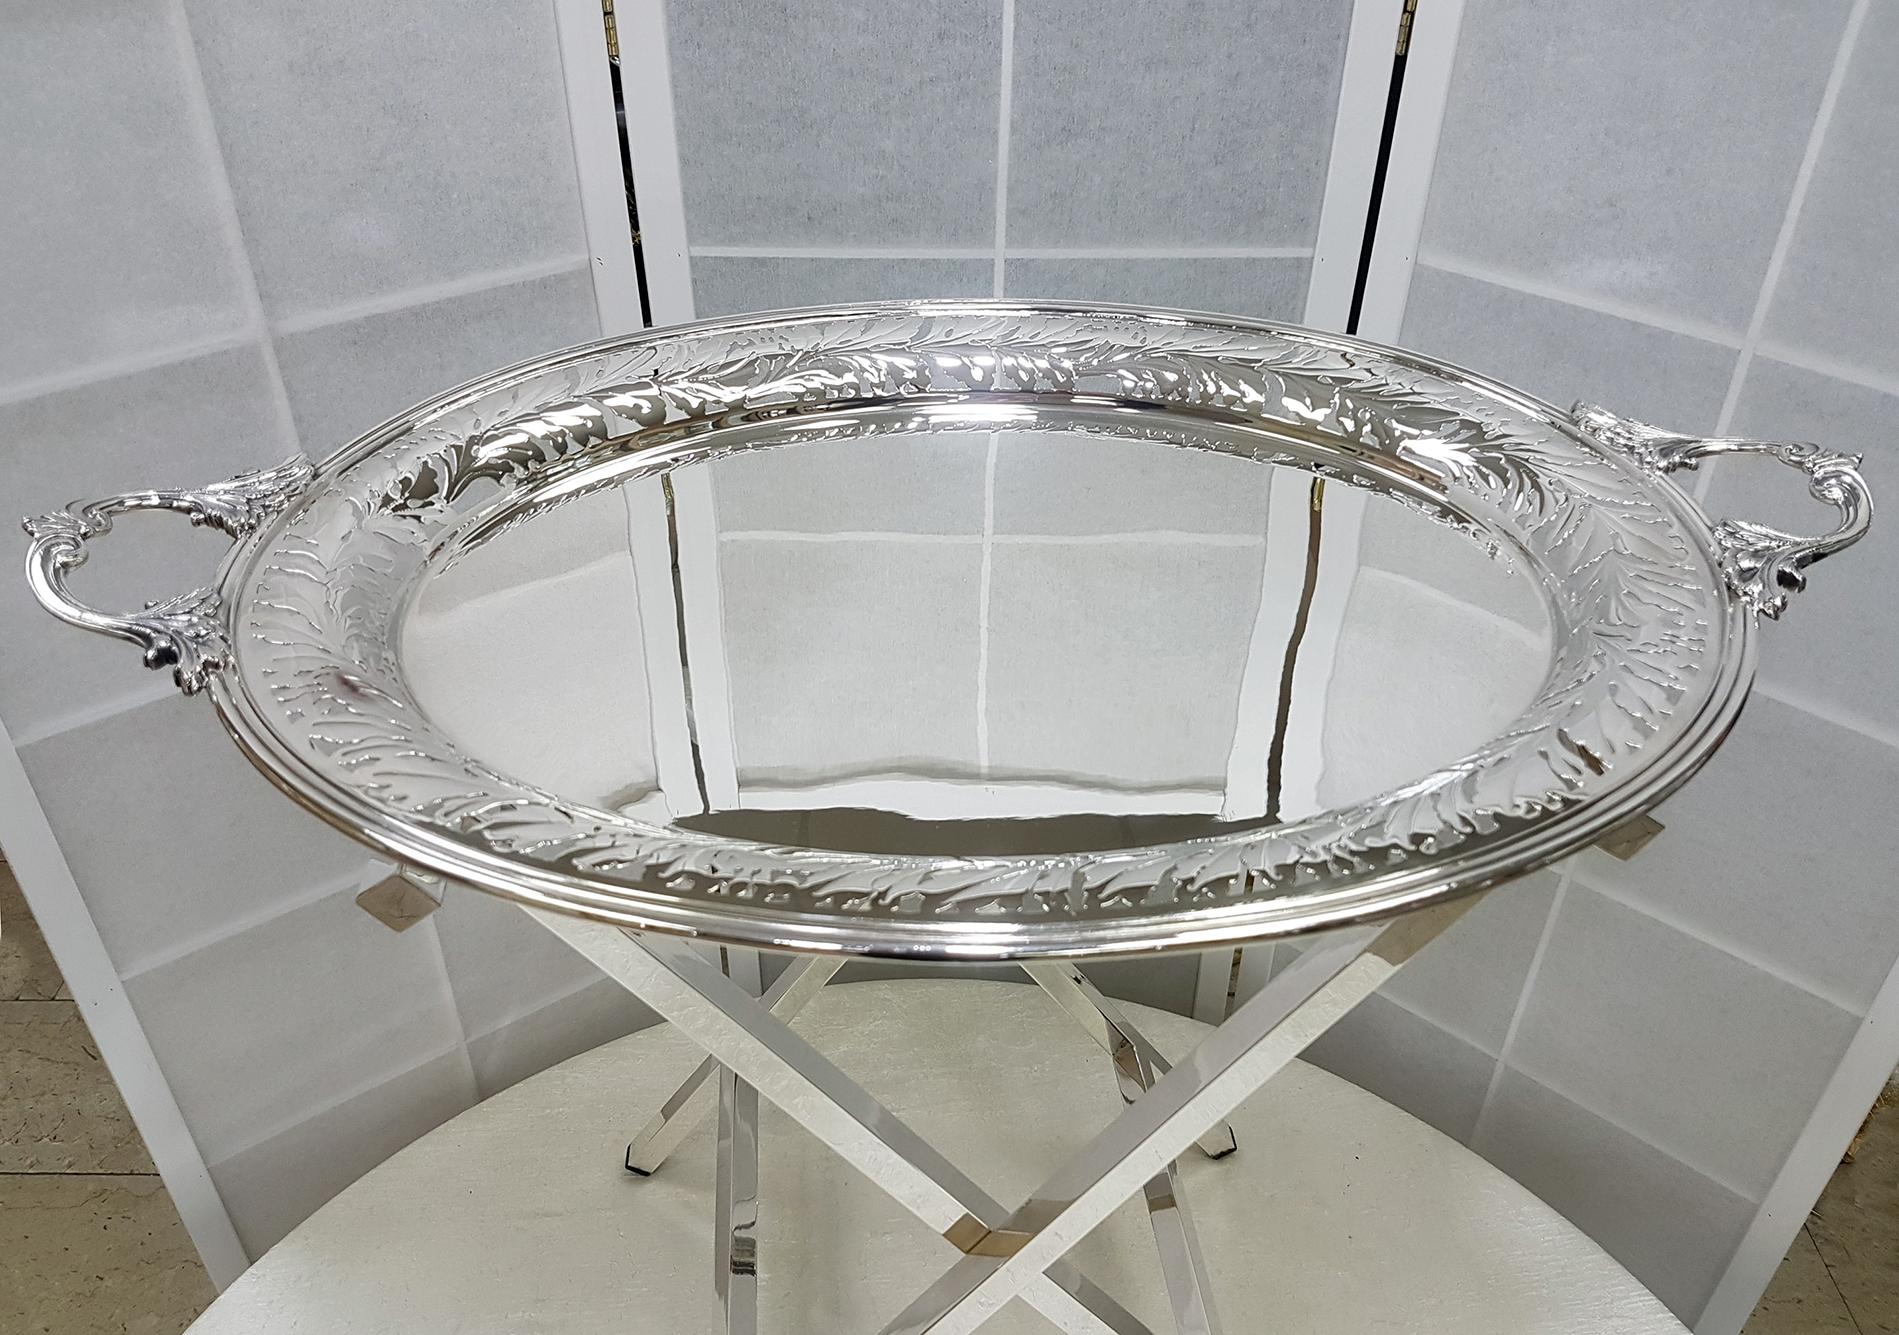 Oval tray with handles and hand-pierced edge with leaf motif.
The tray is completely handmade. The handles are in silver with fusion processing that take up the leaf design.
The solid silver support was handmade with a square section tube.
6,885